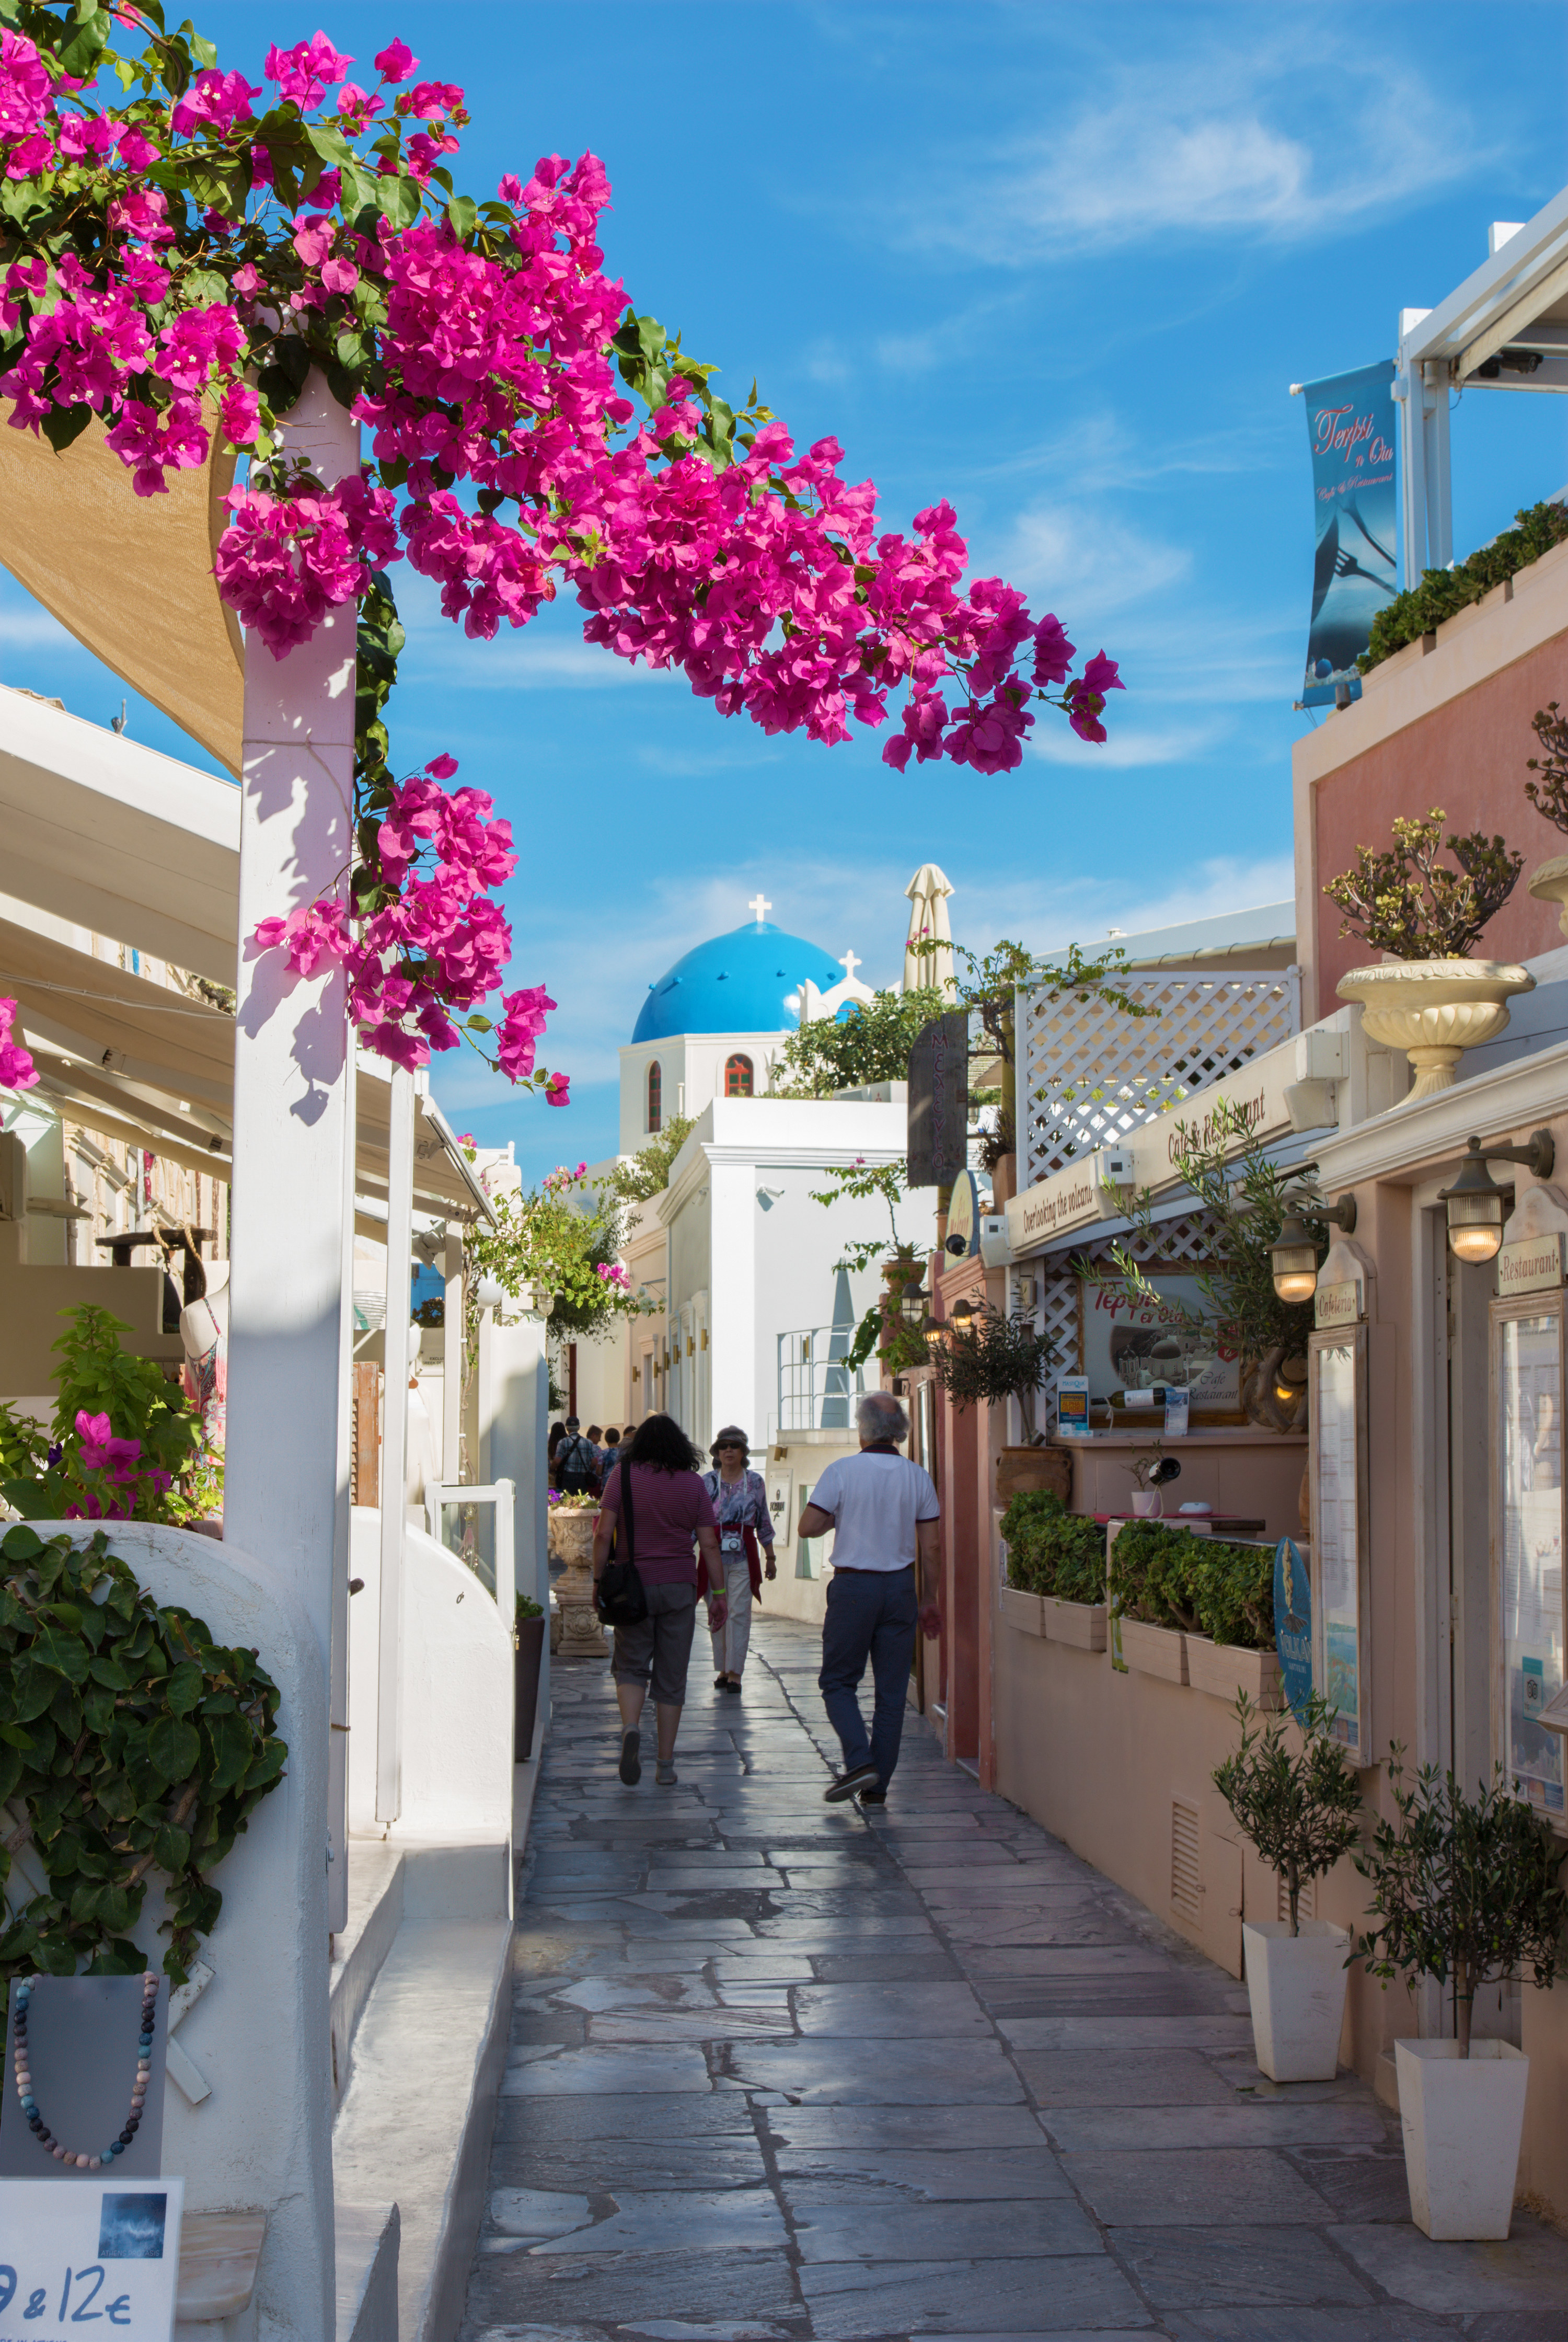 The street of Oia with the souvenirs shops and restaurants and number of peoples.